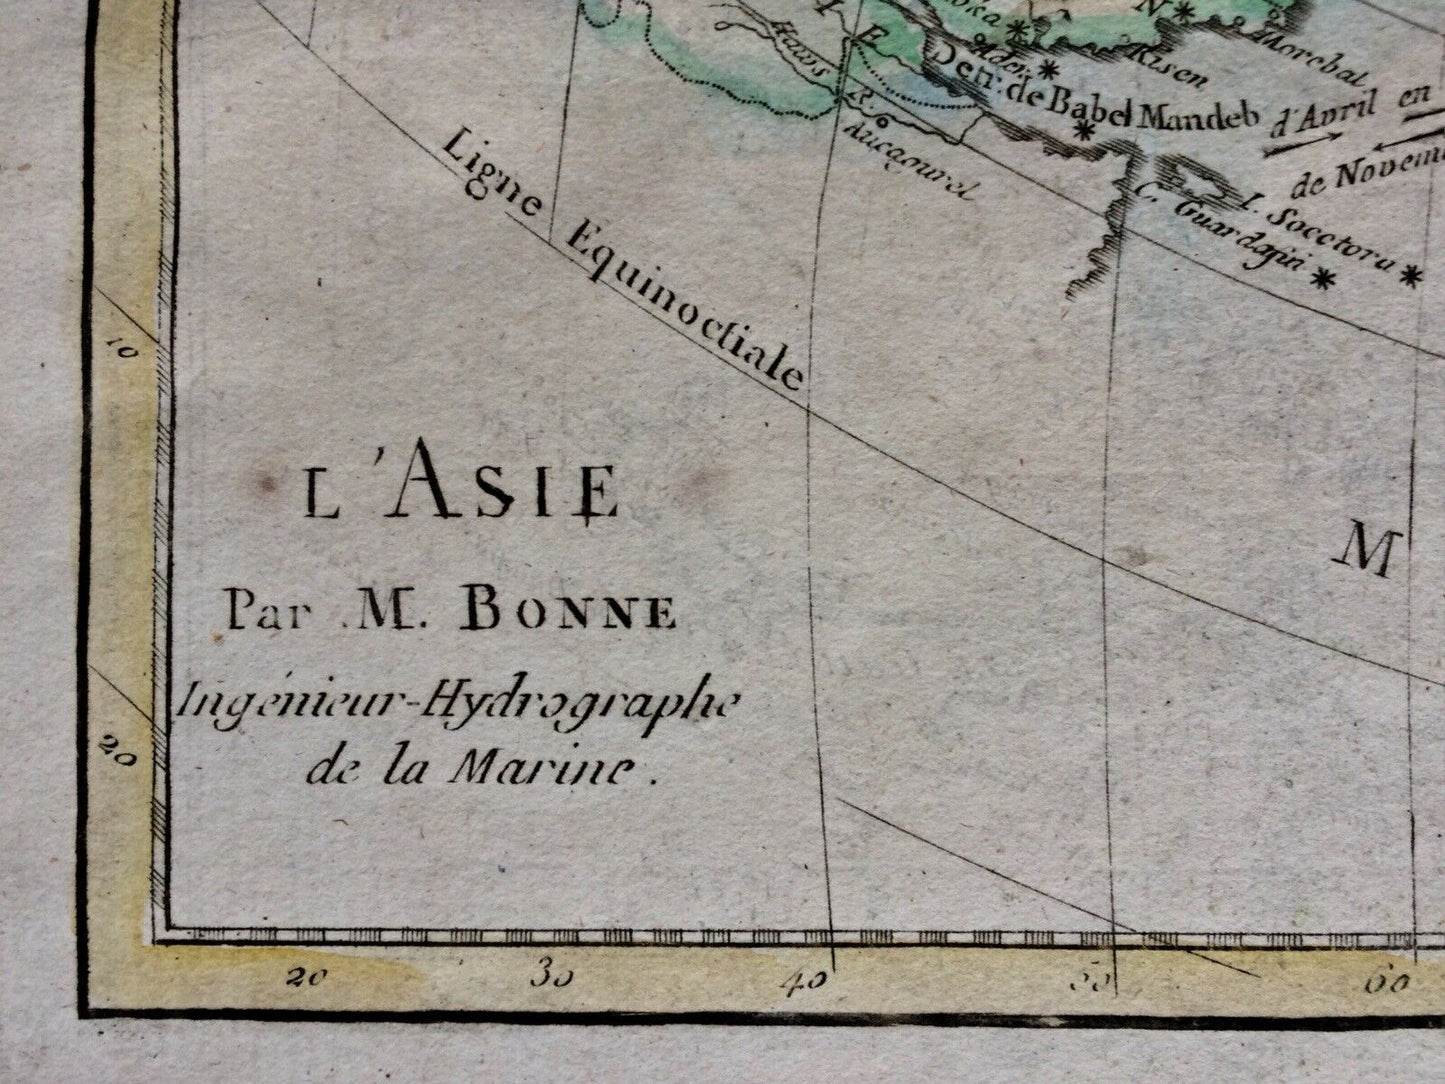 ASIA &amp; INDONESIA - M. BONNE HYDROGRAPHIC ENGINEER OF THE NAVY - WATERCOLOR 1780